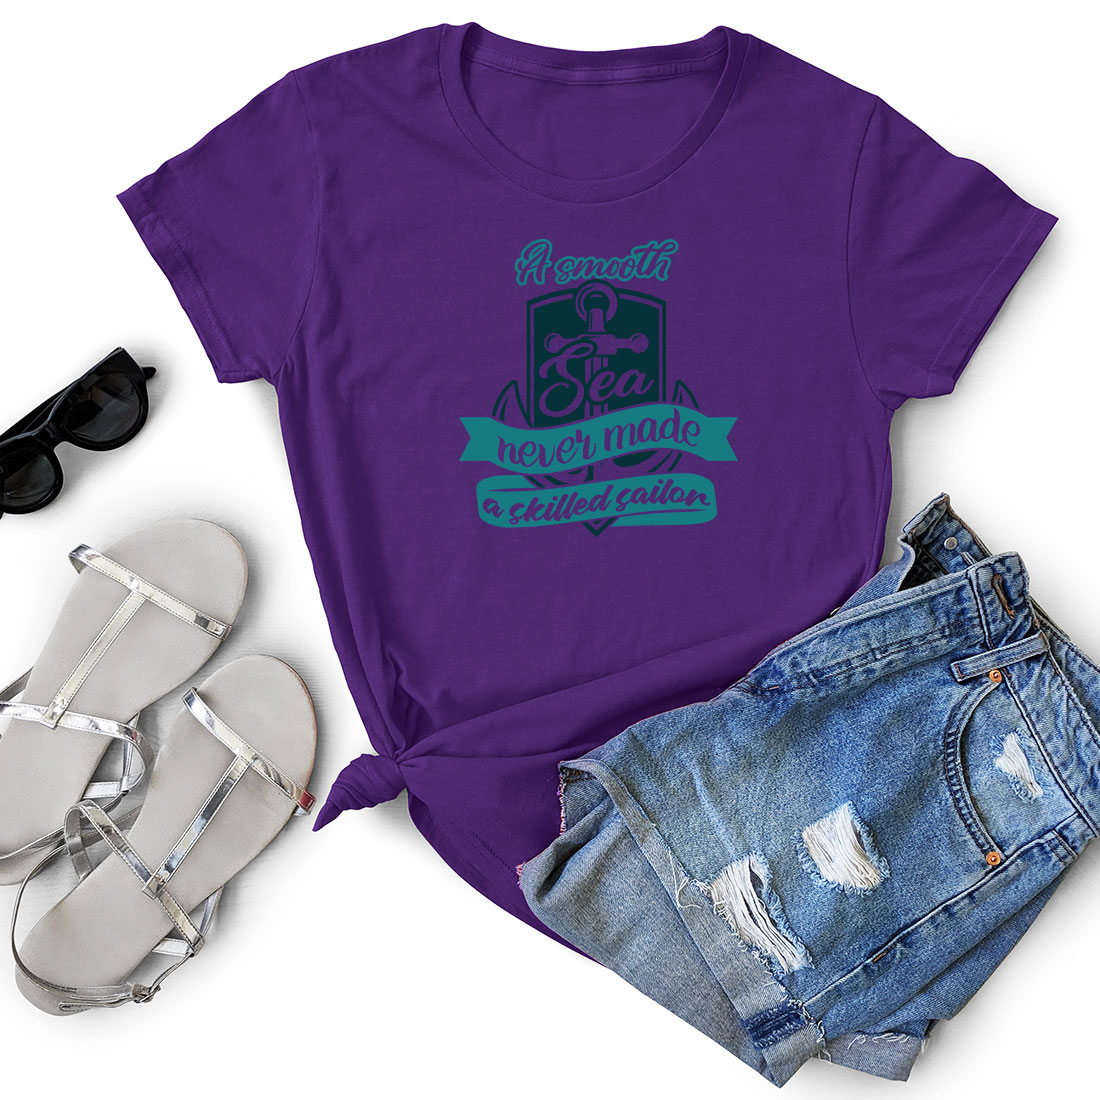 T - shirt with a purple background and a pair of shorts.